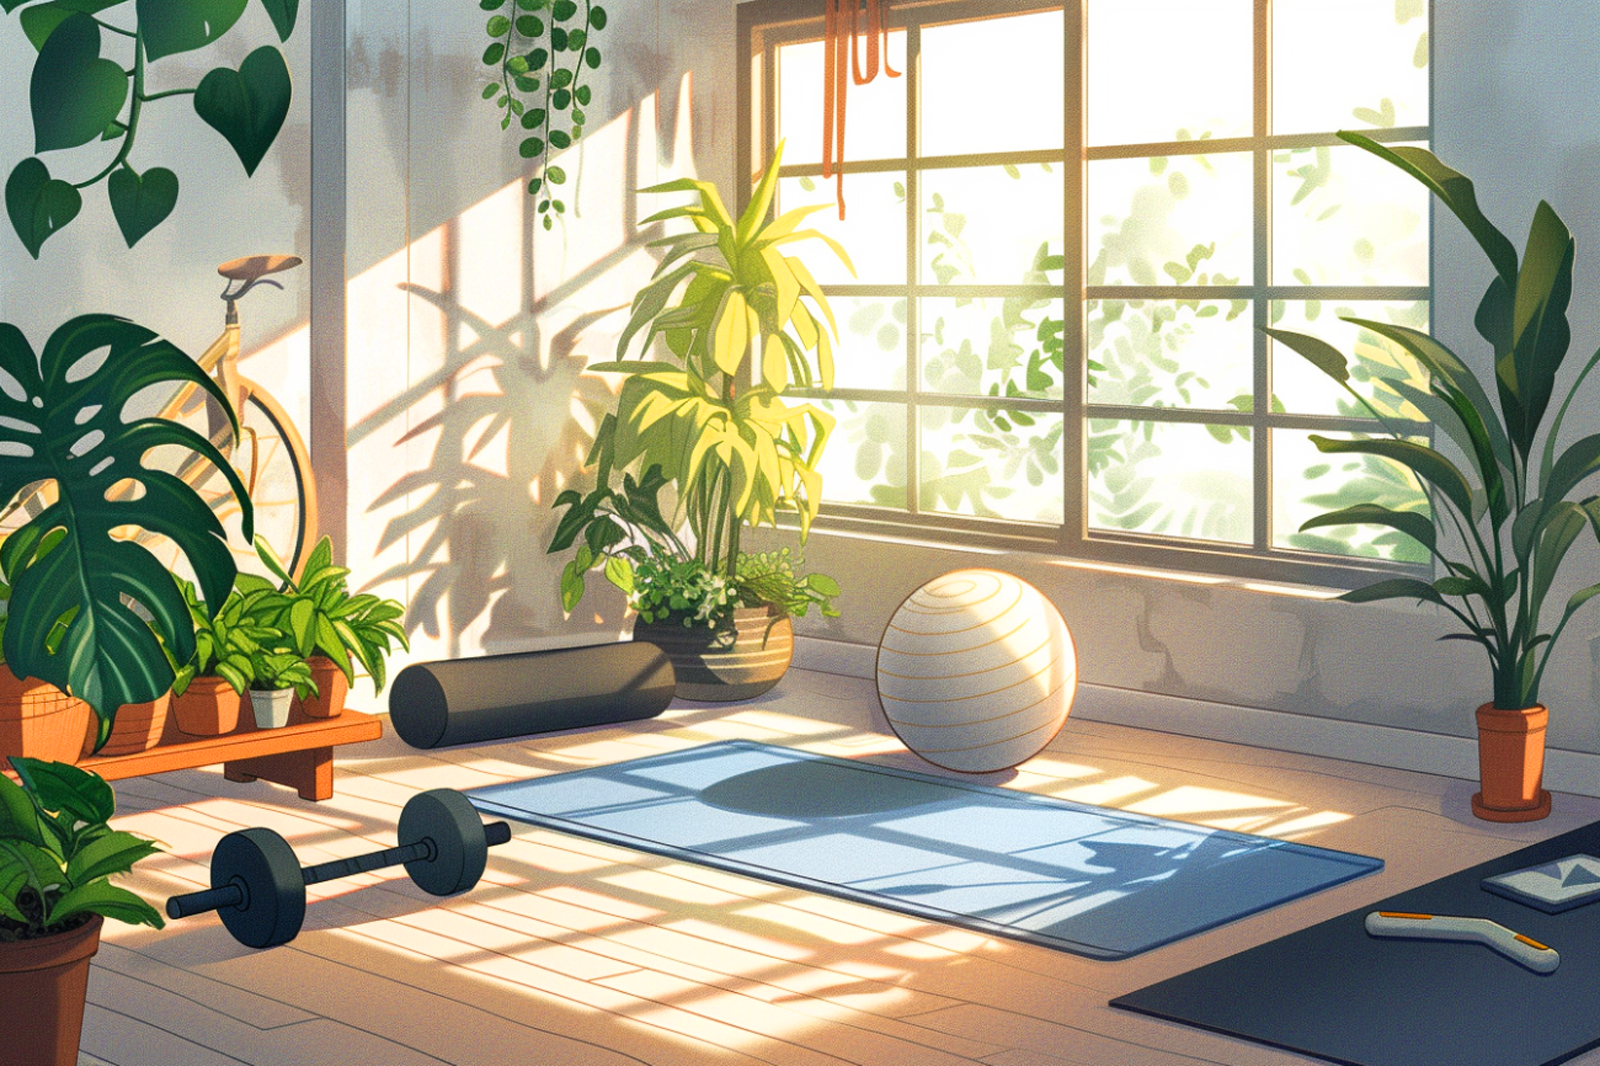 Illustration of an in-home workout spot with a yoga mat, dumbells and a ball.